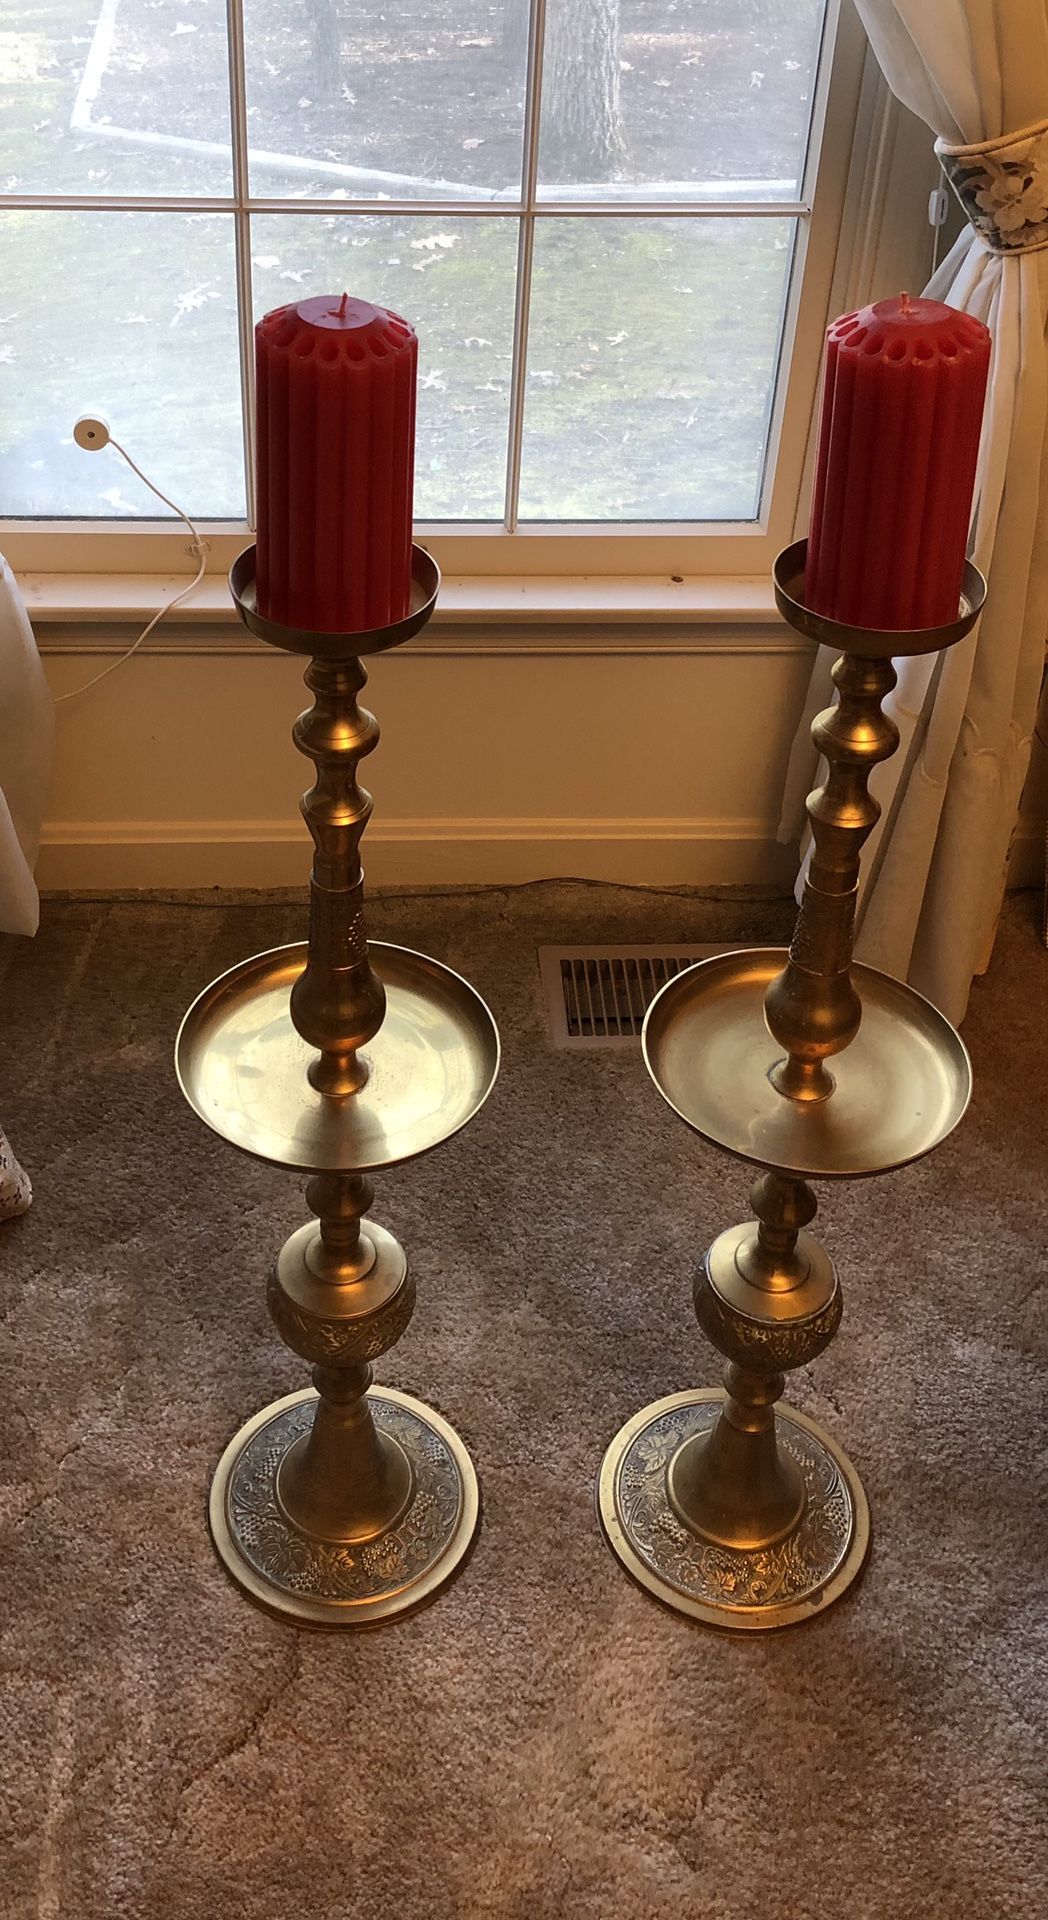 Two tall Brass candlesticks-approximately 3’ tall